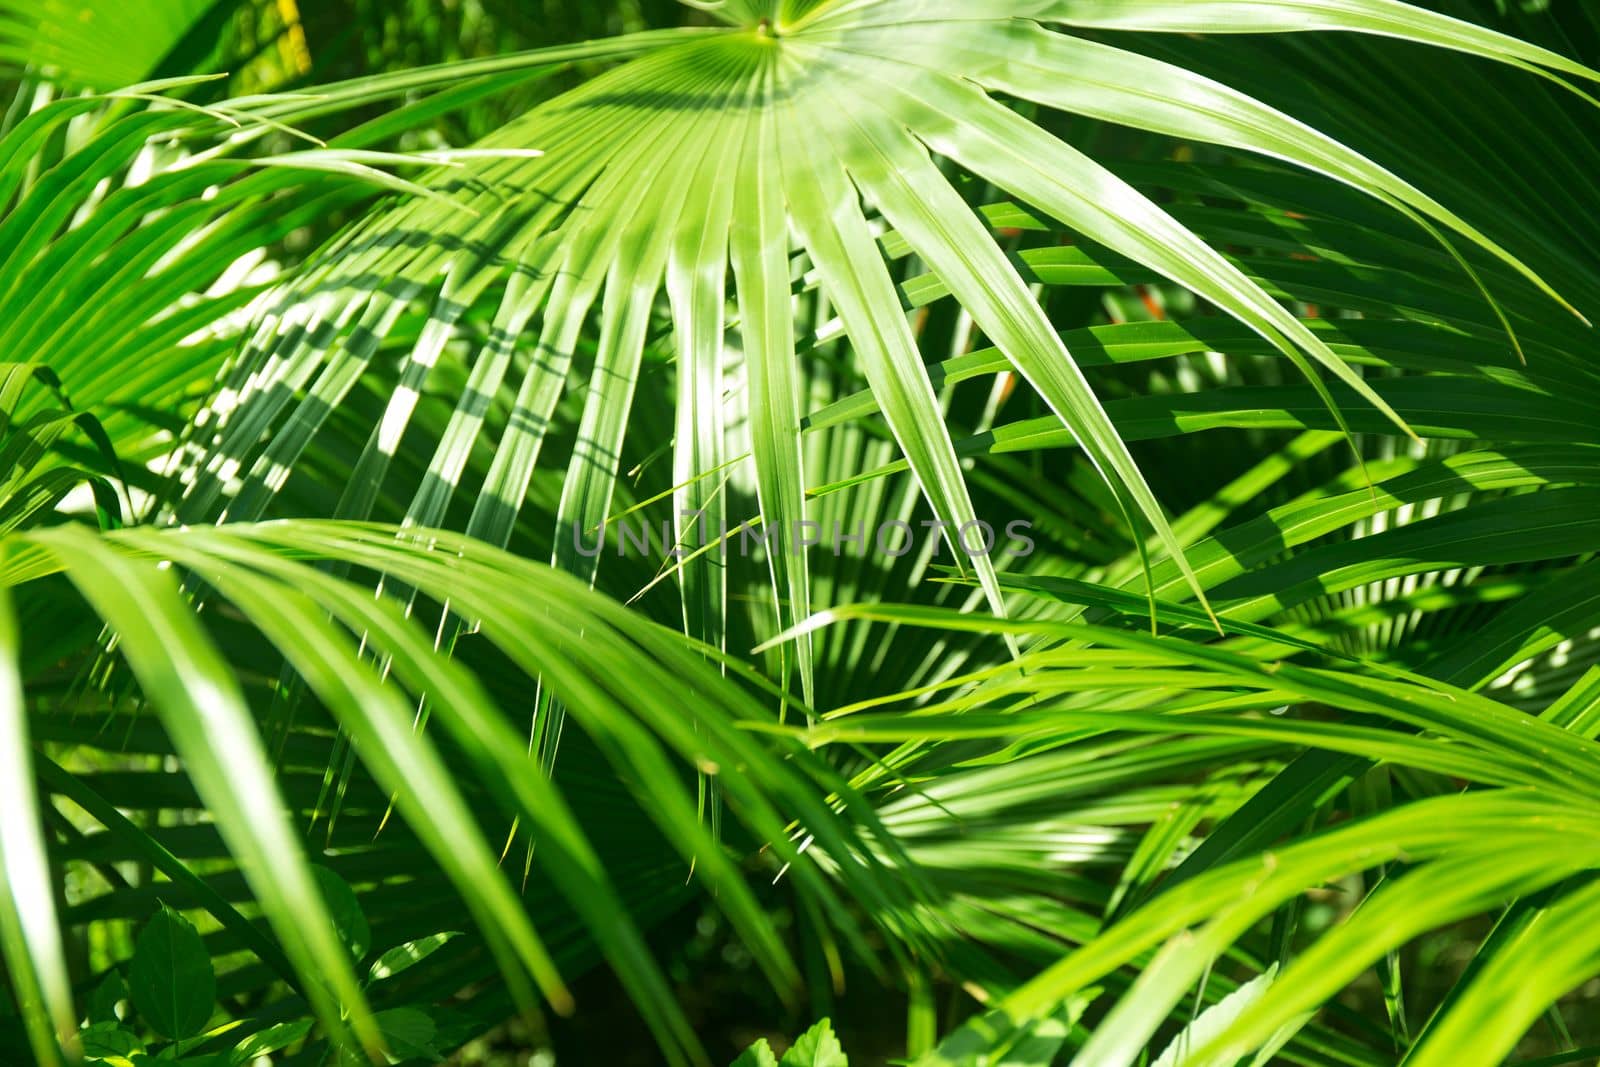 Close up Green Palm Tree Leaves with Harsh Shadows from the Sun.